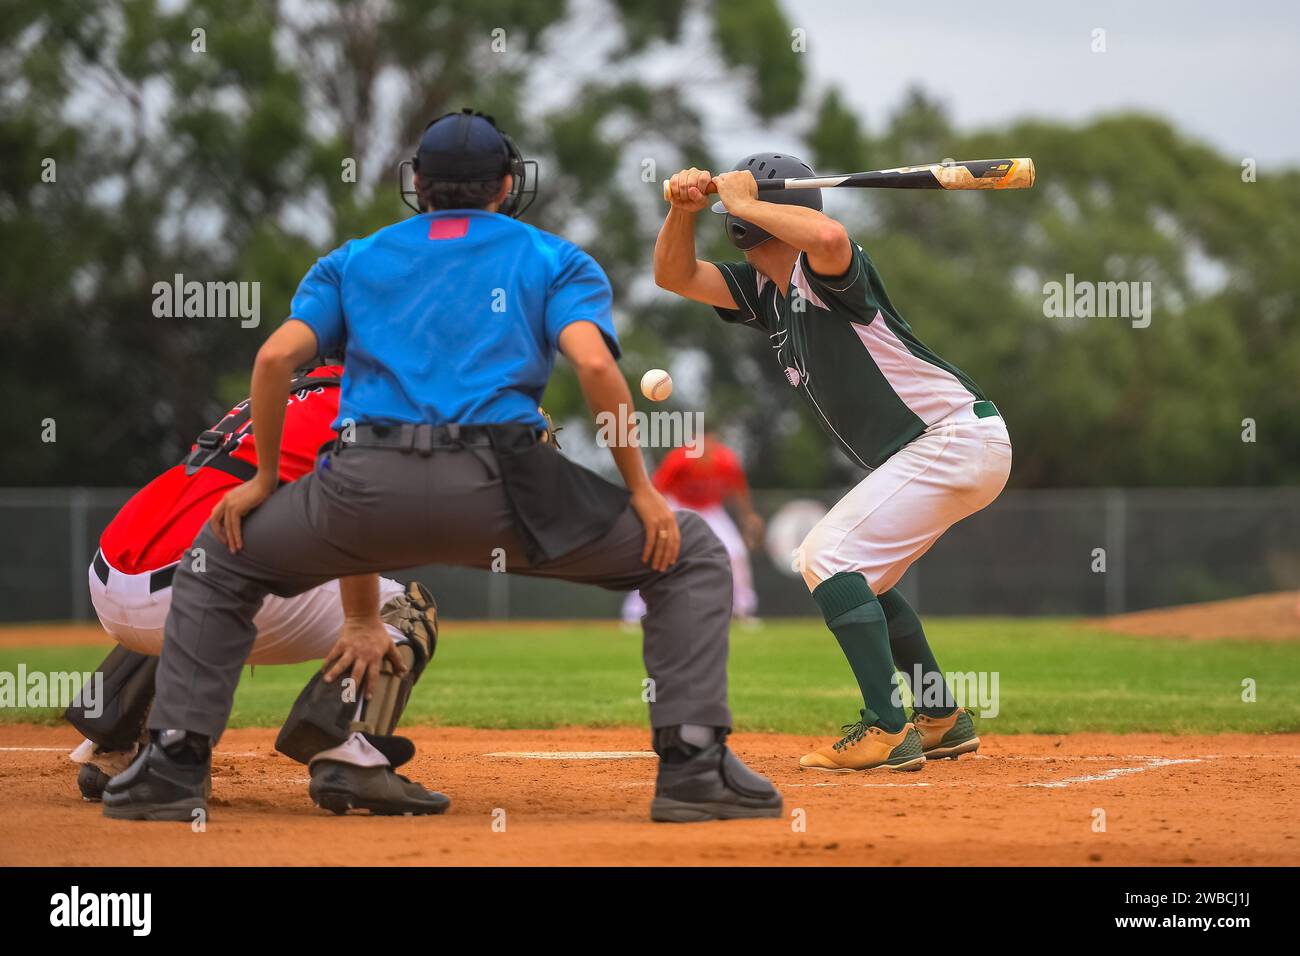 Men playing baseball game. Batter getting ready to hit a pitch during ballgame on a baseball diamond, field. Stock Photo